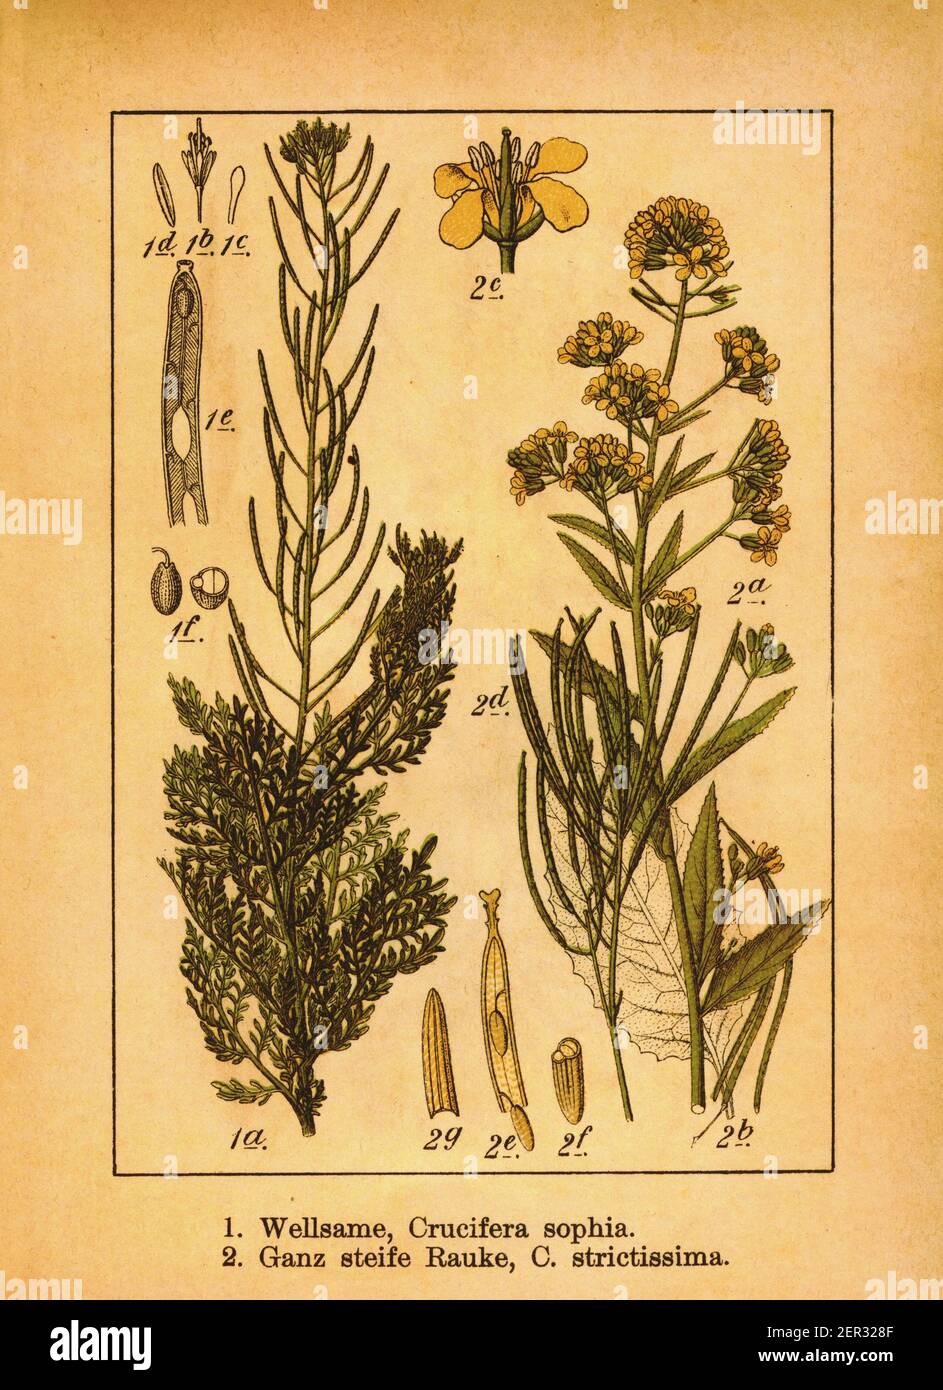 Antique engraving of flixweed and Crucifera strictissima. Illustration by Jacob Sturm (1771-1848) from the book Deutschlands Flora in Abbildungen nach Stock Photo